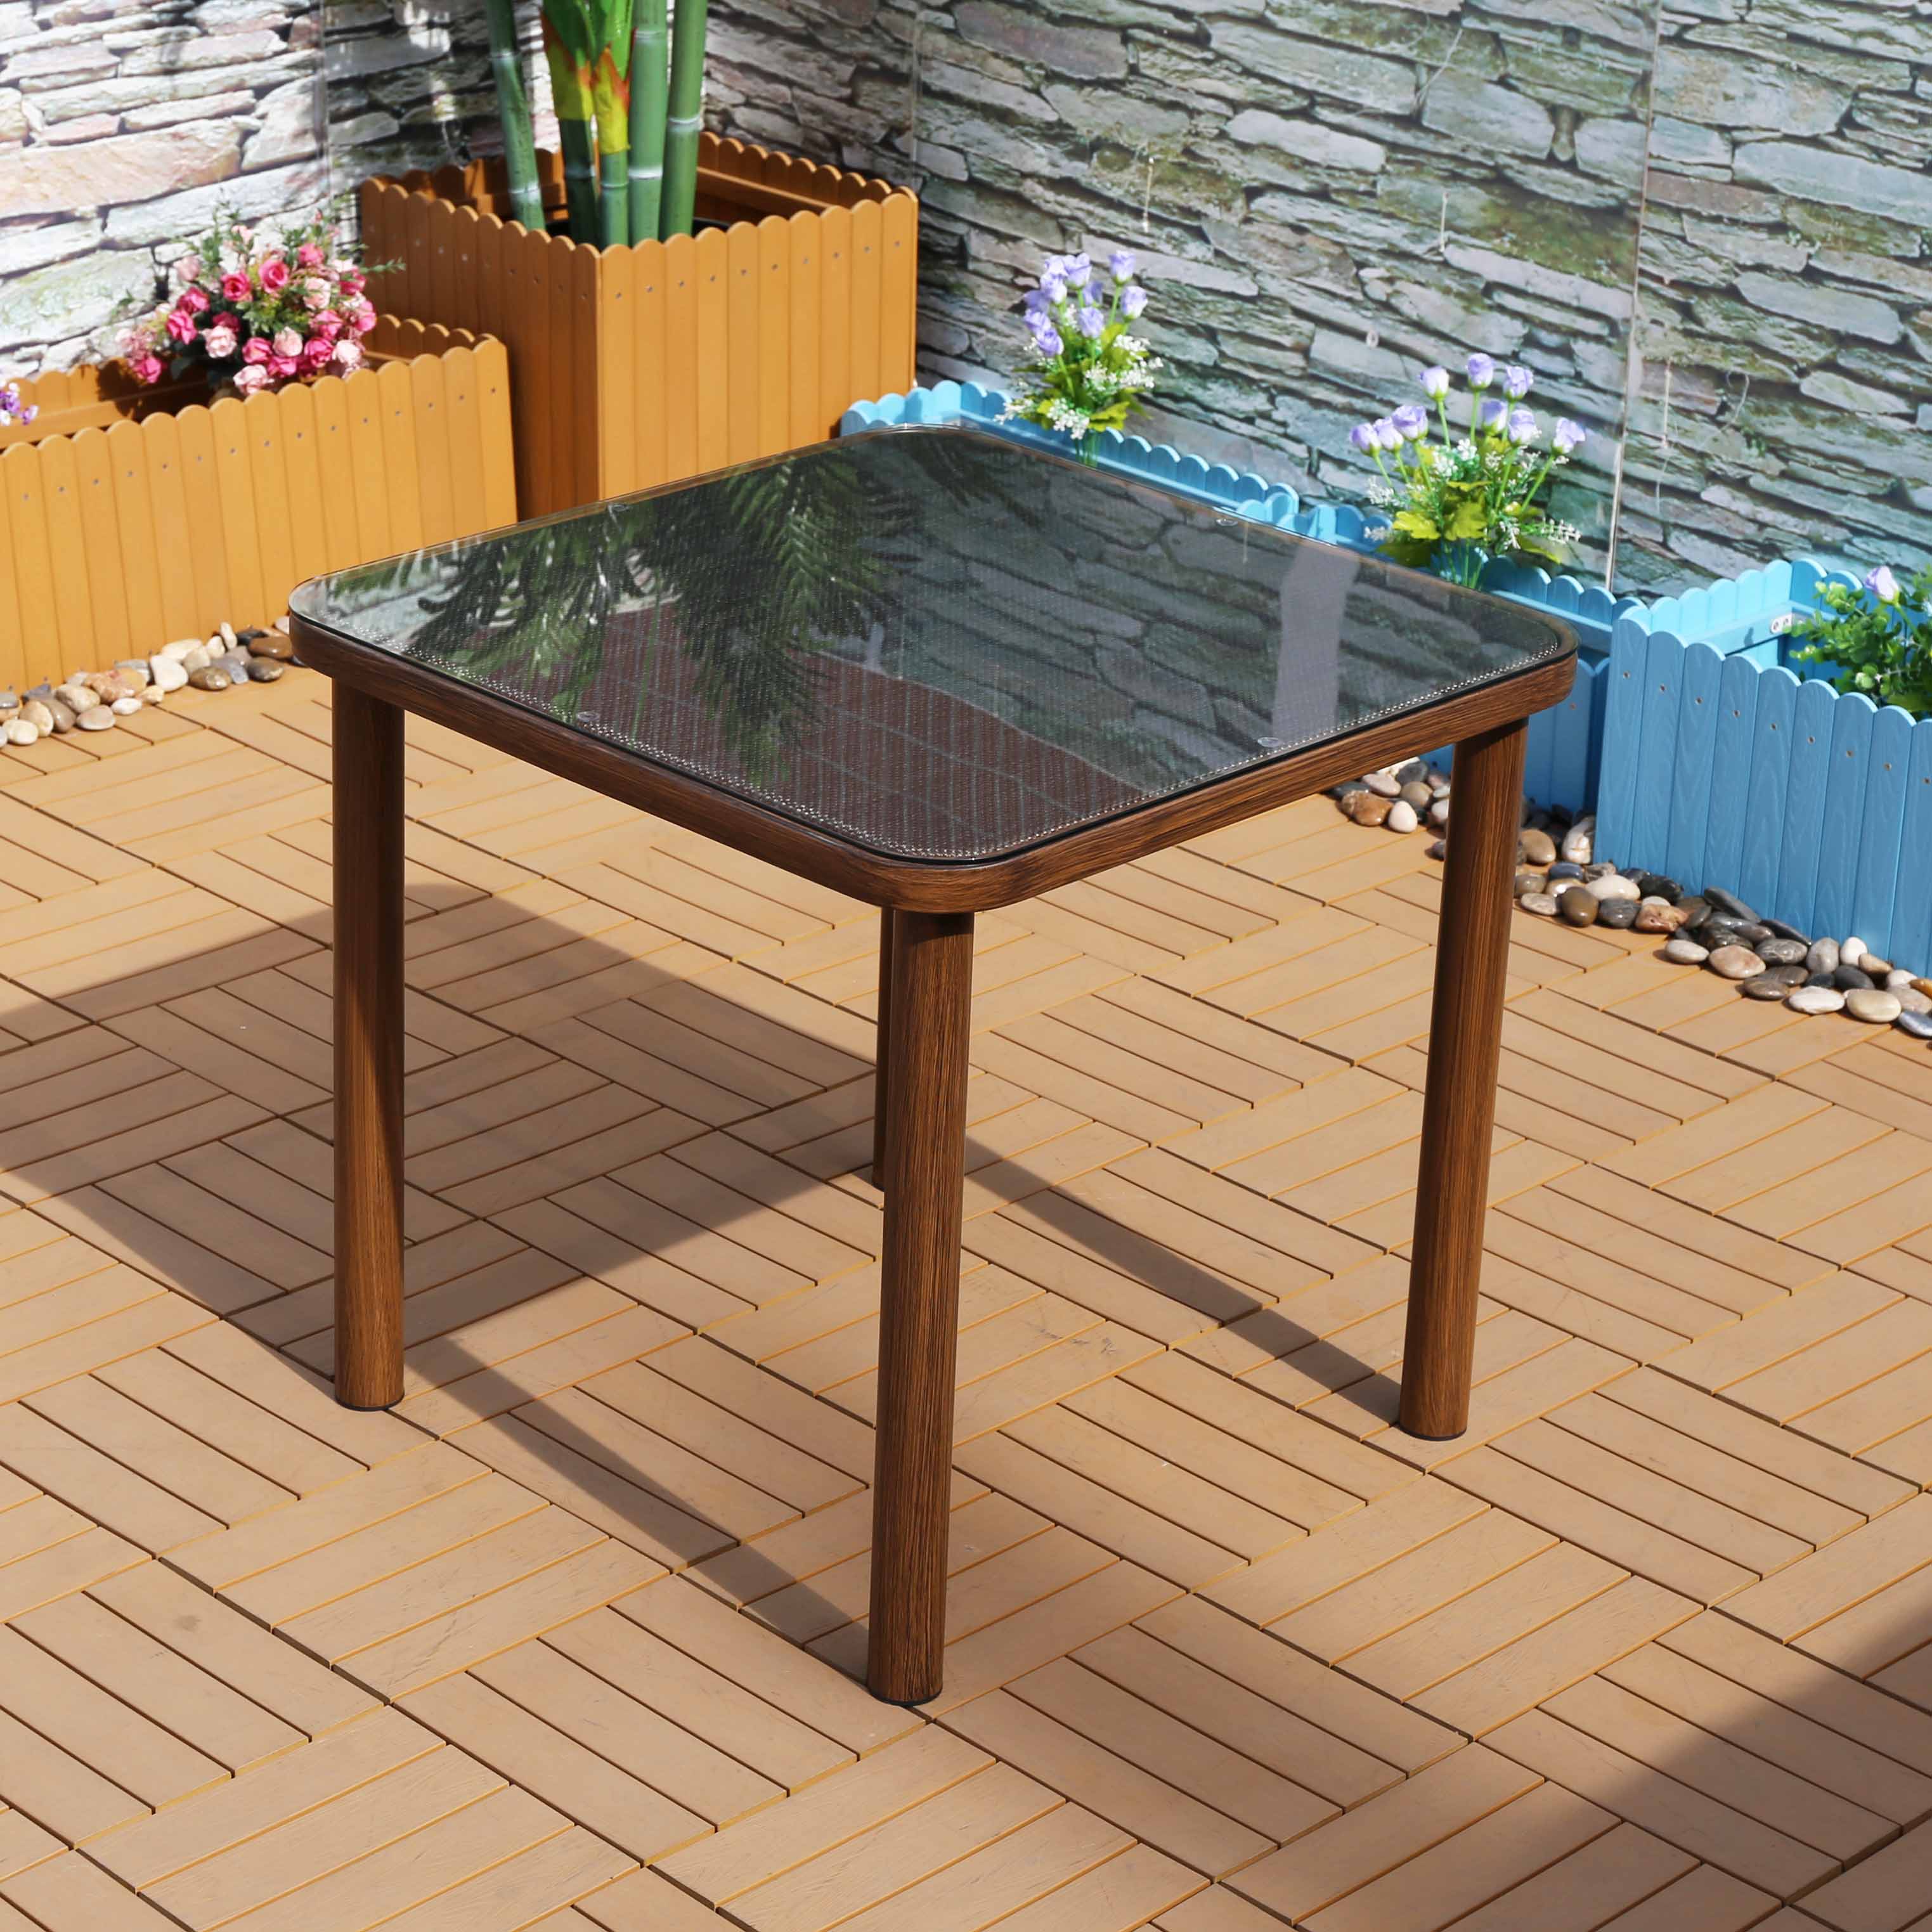 Uplion Garden furniture aluminum bistro cafe table outdoor bamboo look coffee dining table